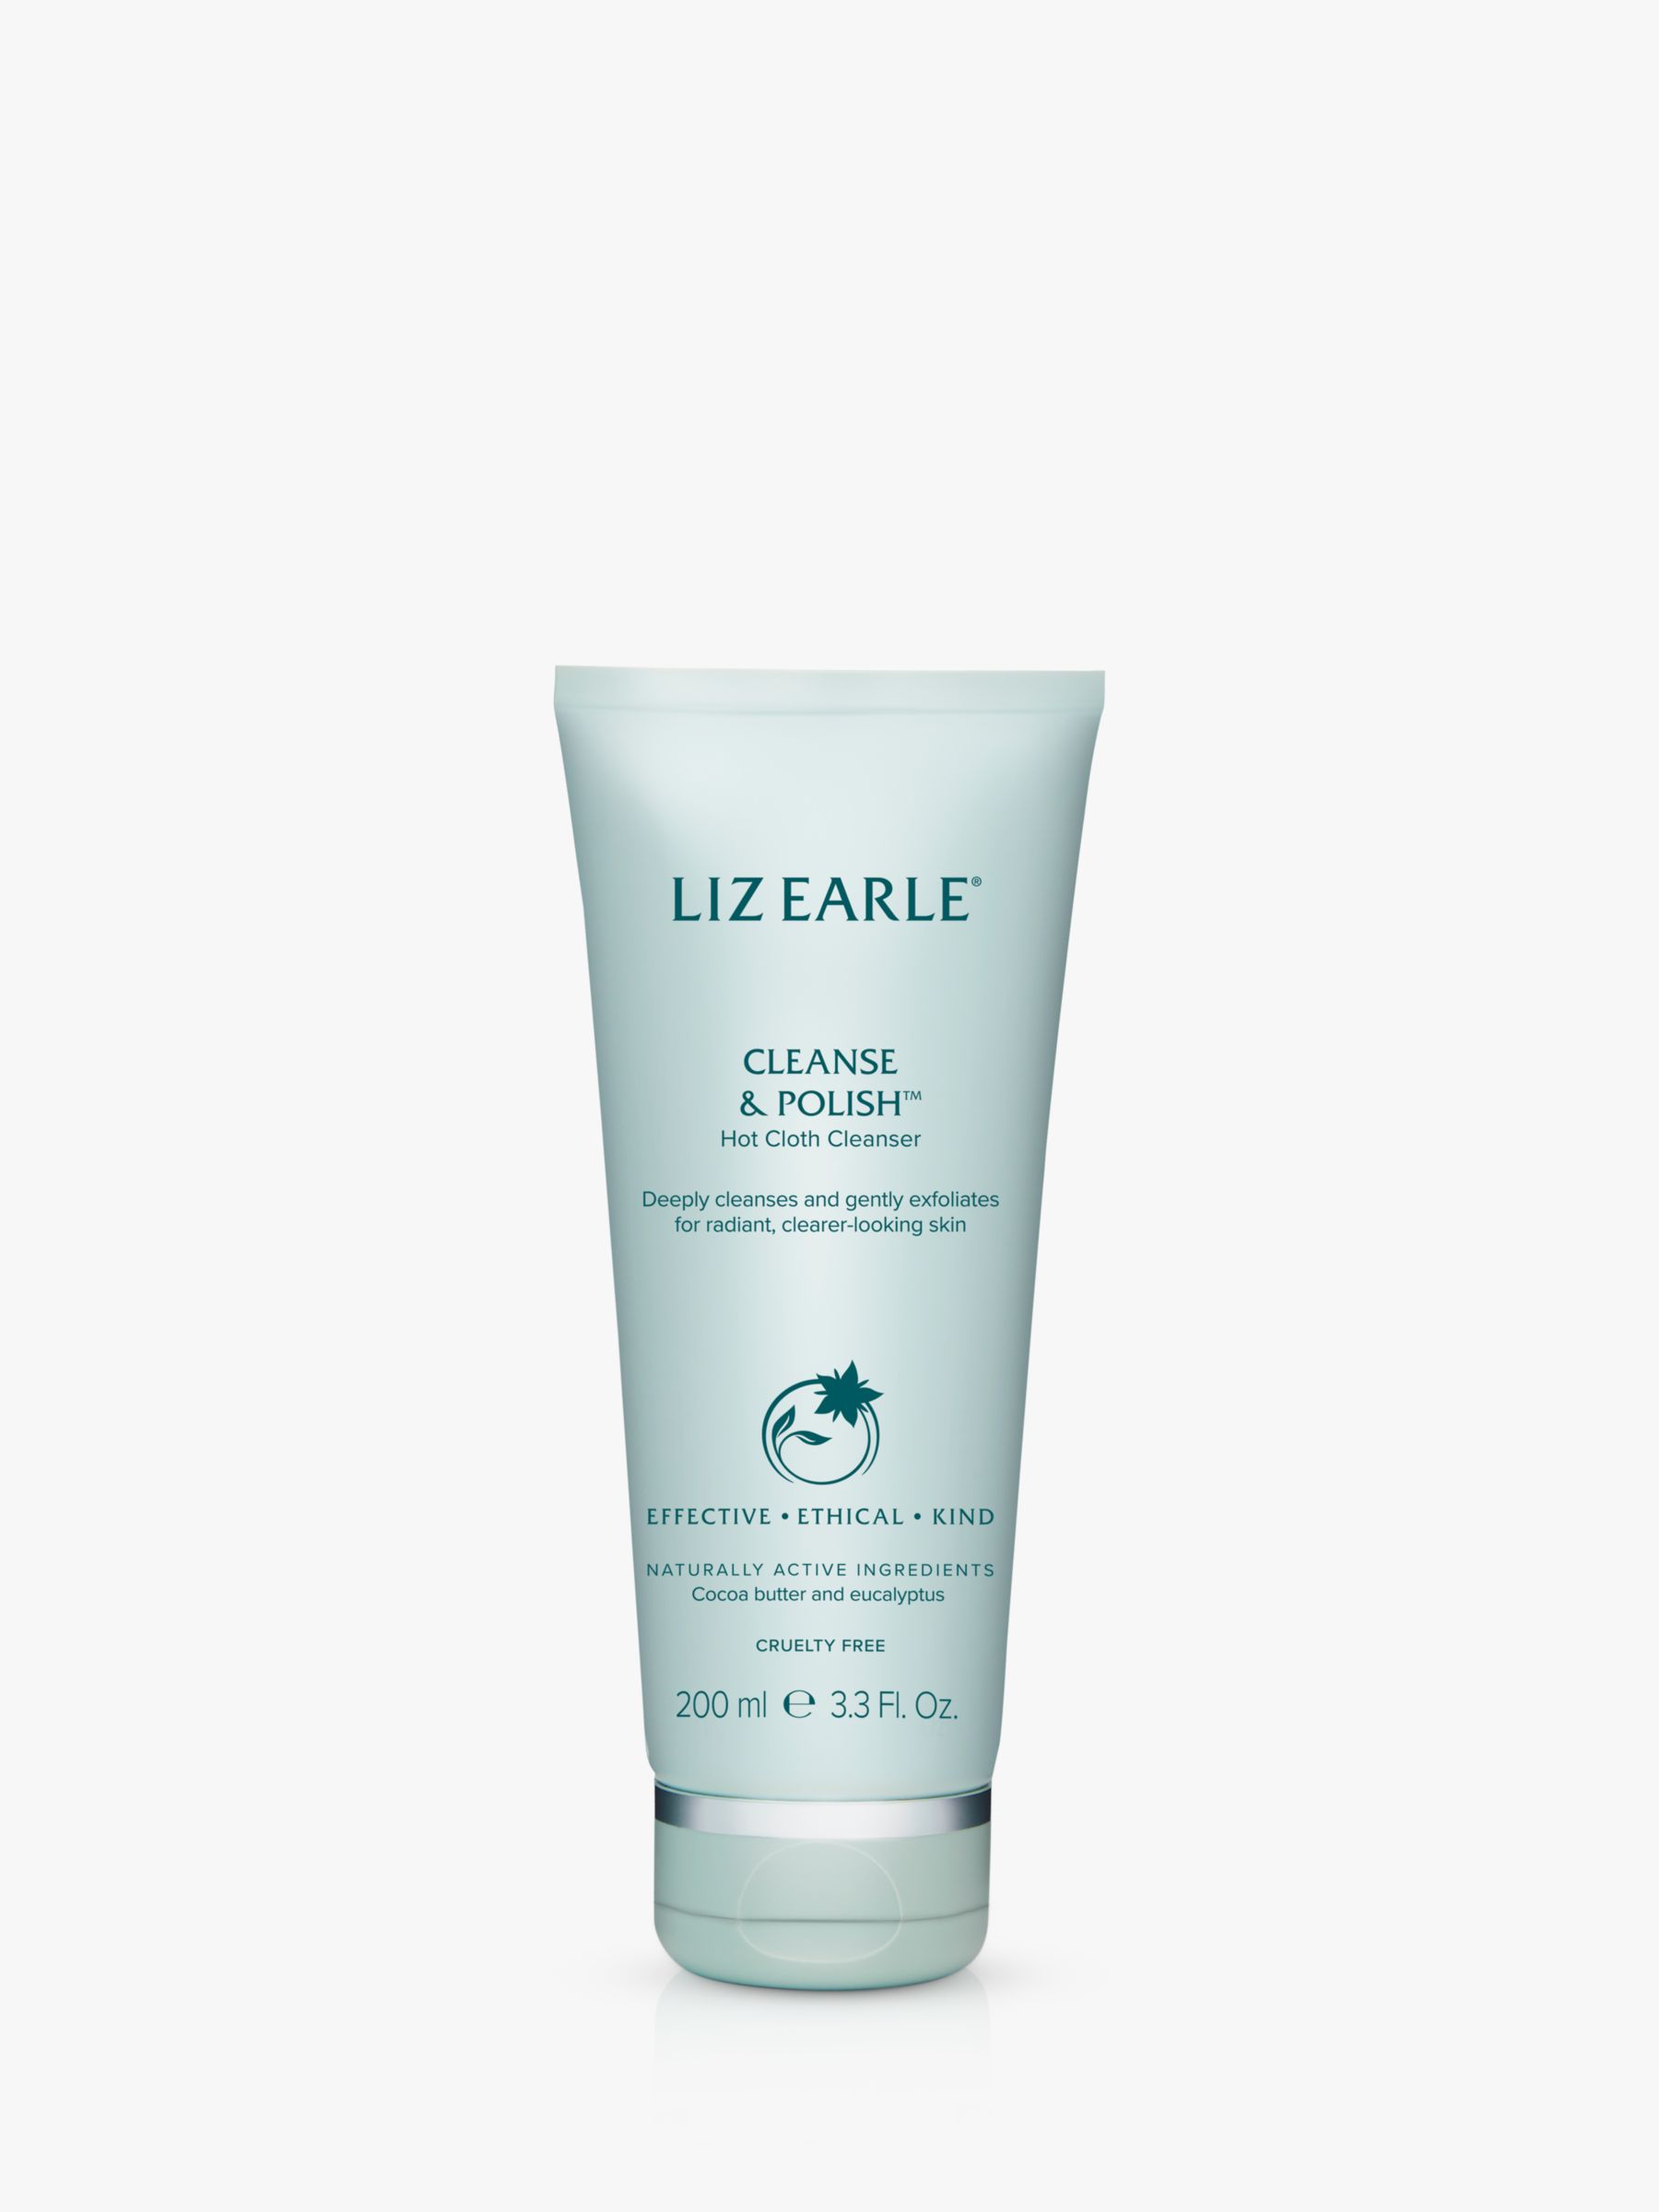 Liz Earle Cleanse And Polish™ Hot Cloth Cleanser 200ml At John Lewis And Partners